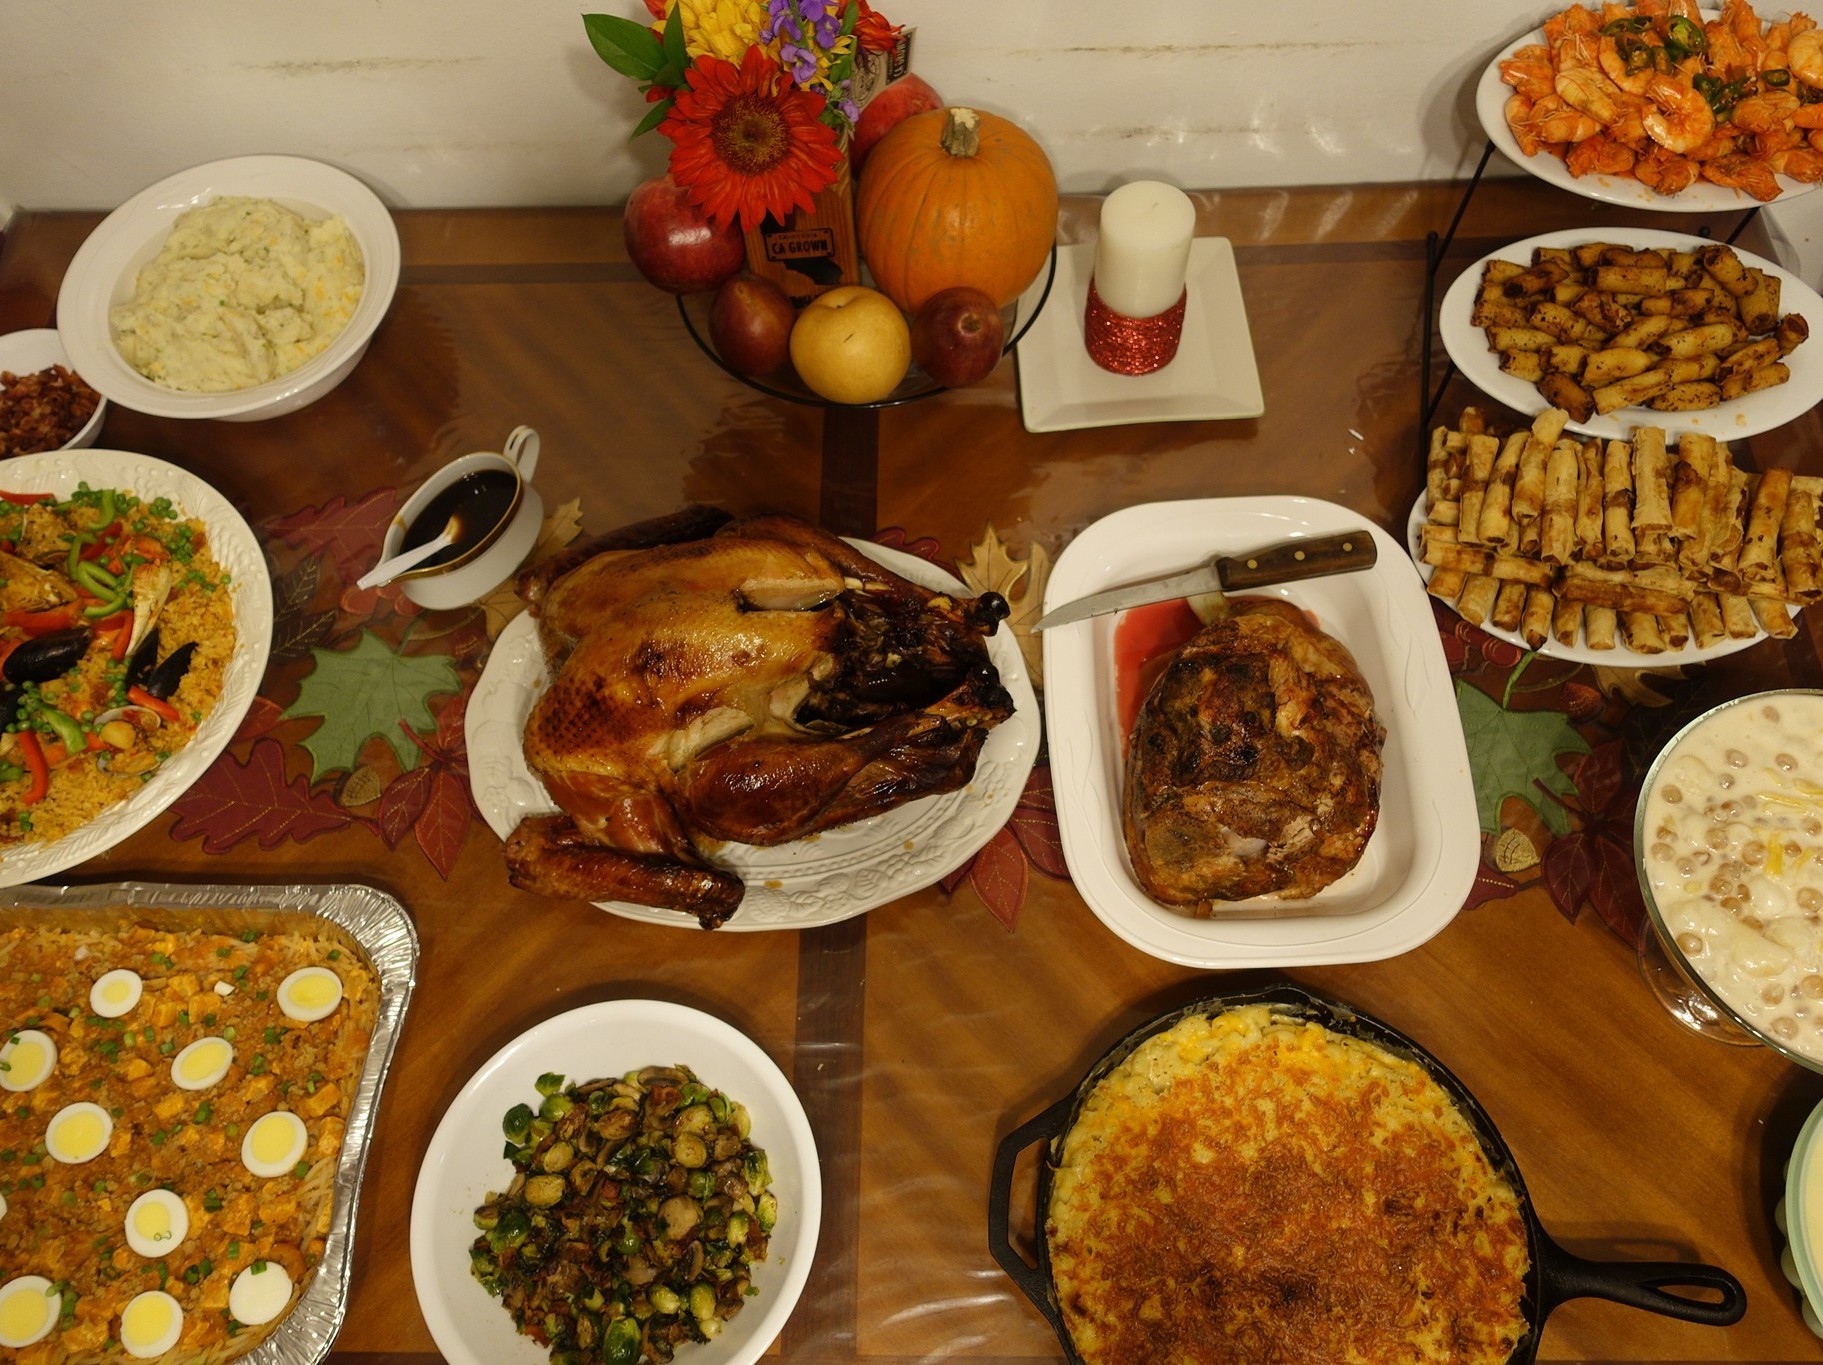 PJ Policarpio's Thanksgiving spread, last year. The feast includes Filipino paella, a noodle dish called palabok and lumpia, fried egg rolls.